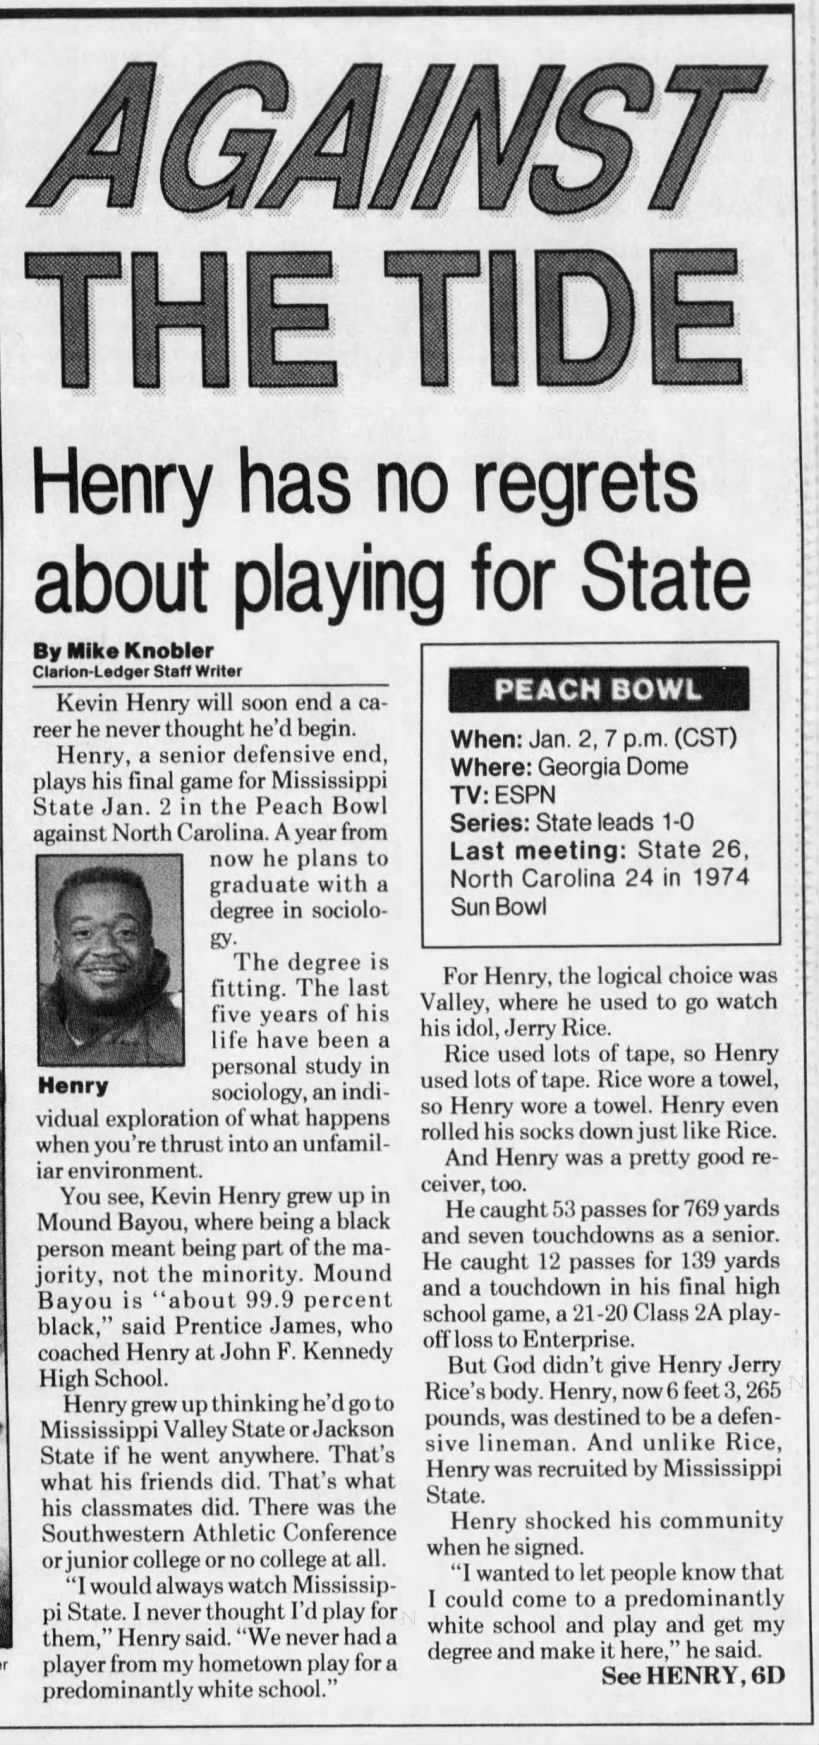 Against the Tide: Henry has no regrets about playing for State